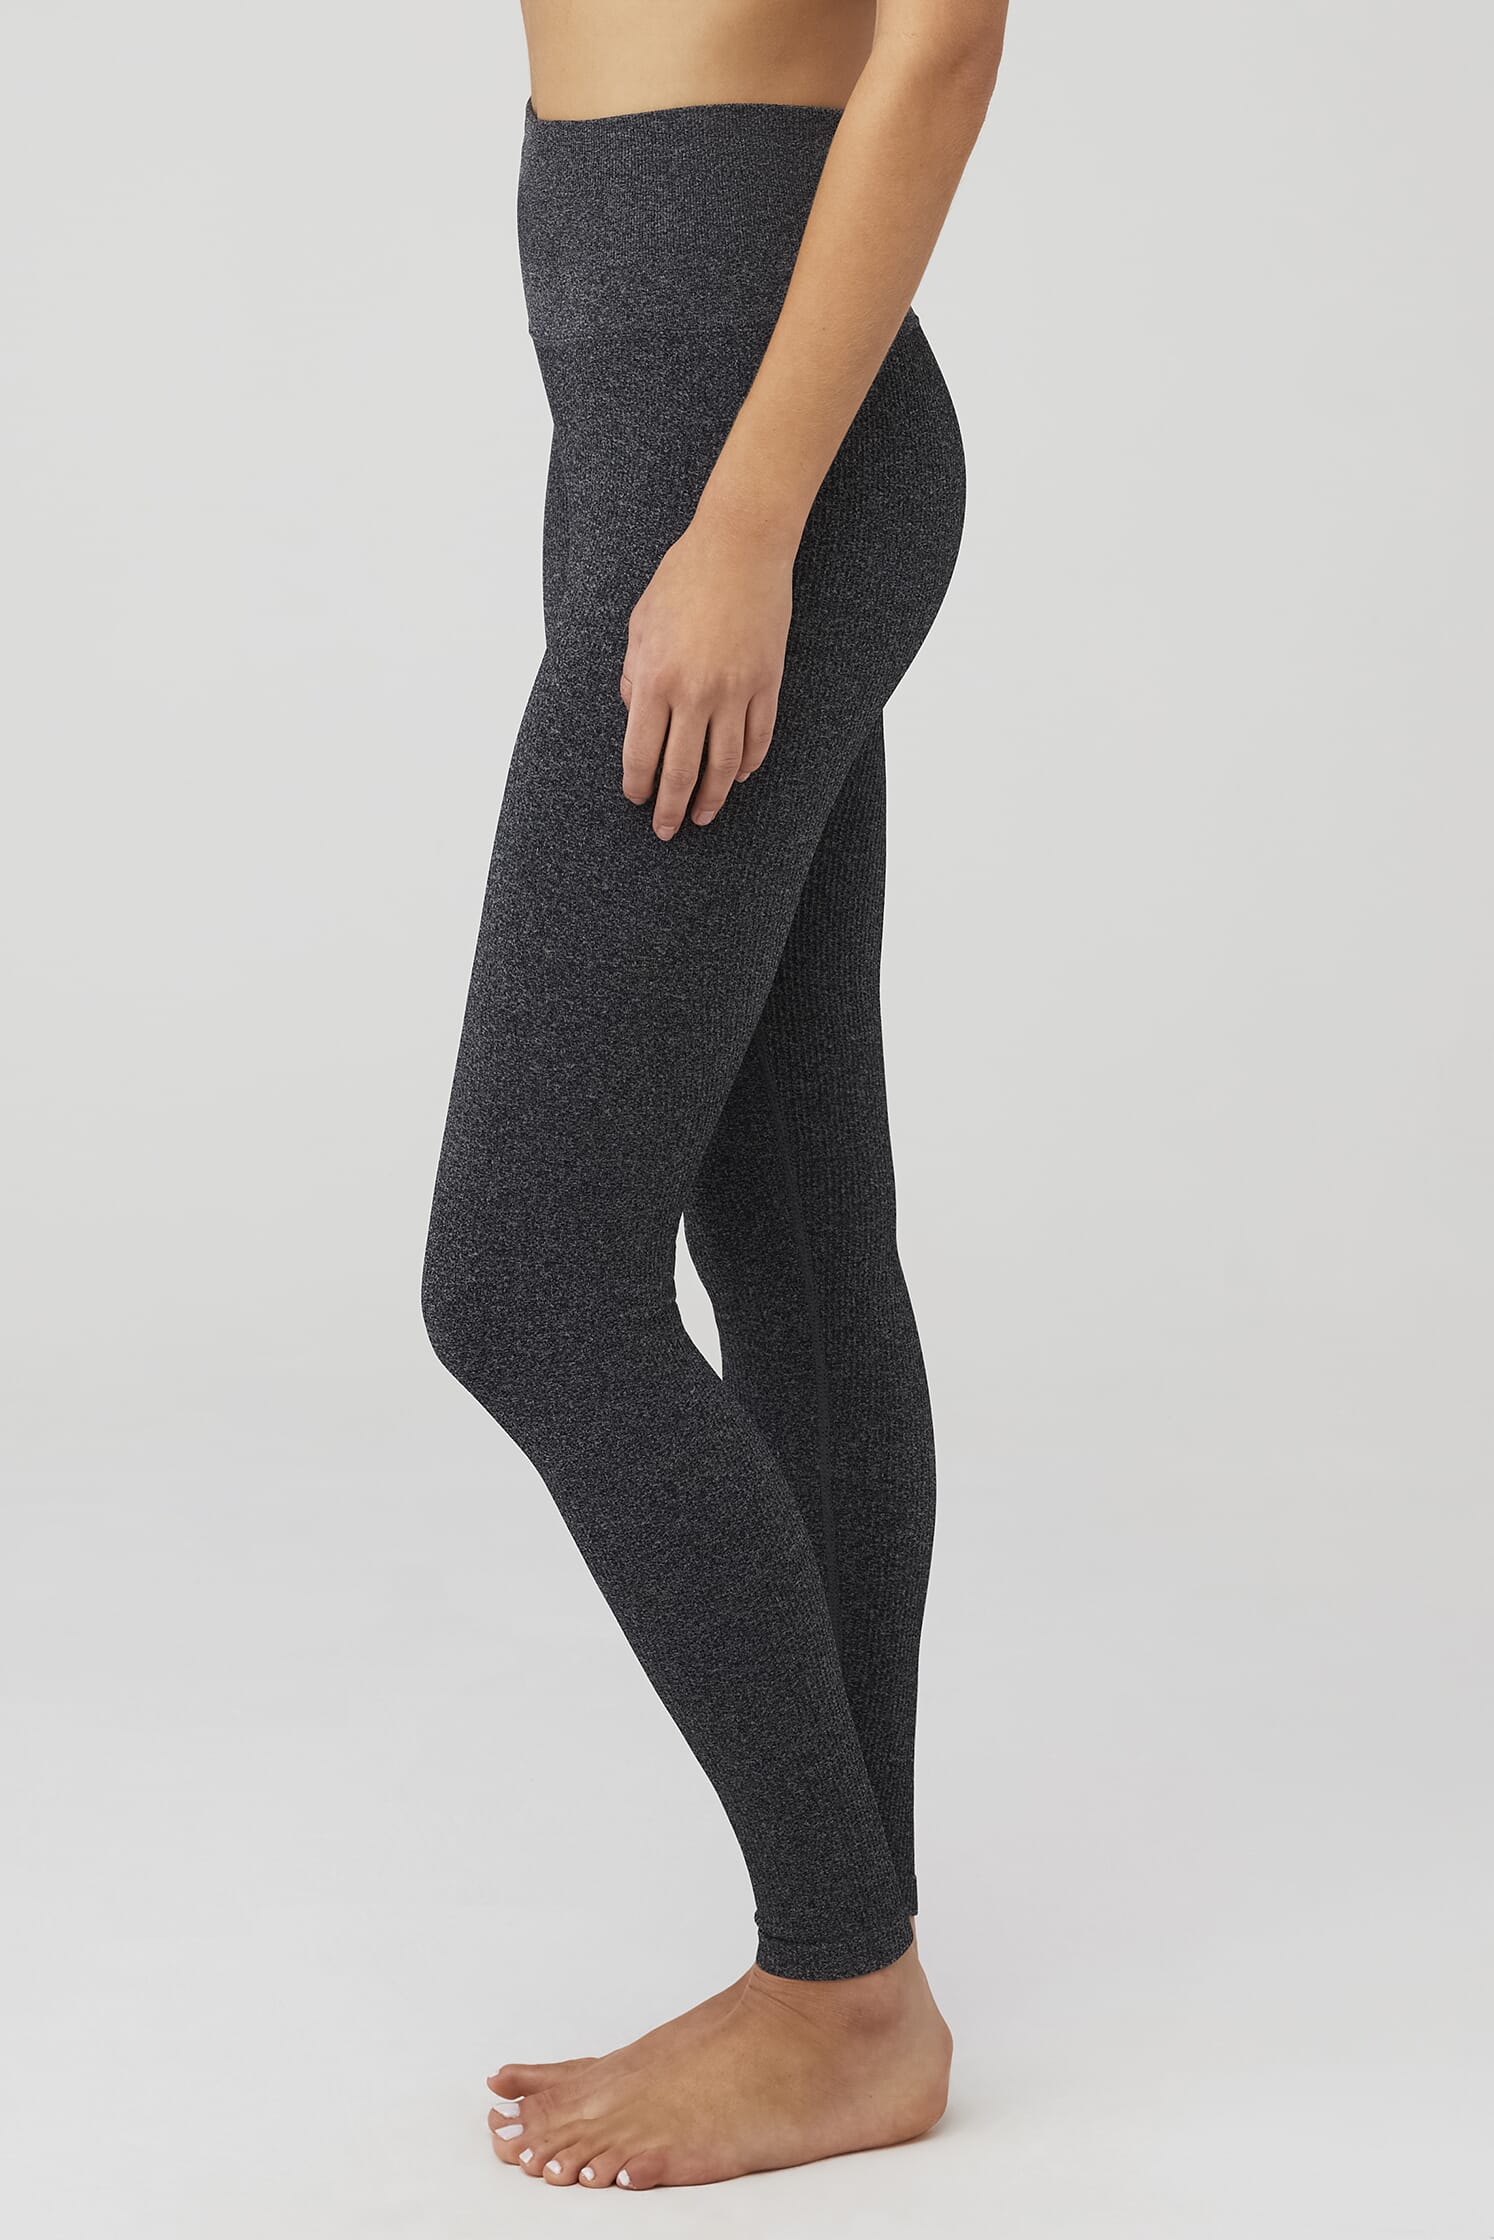 Gangster | Love Sculpt Seamless in Heather Charcoal| FashionPass